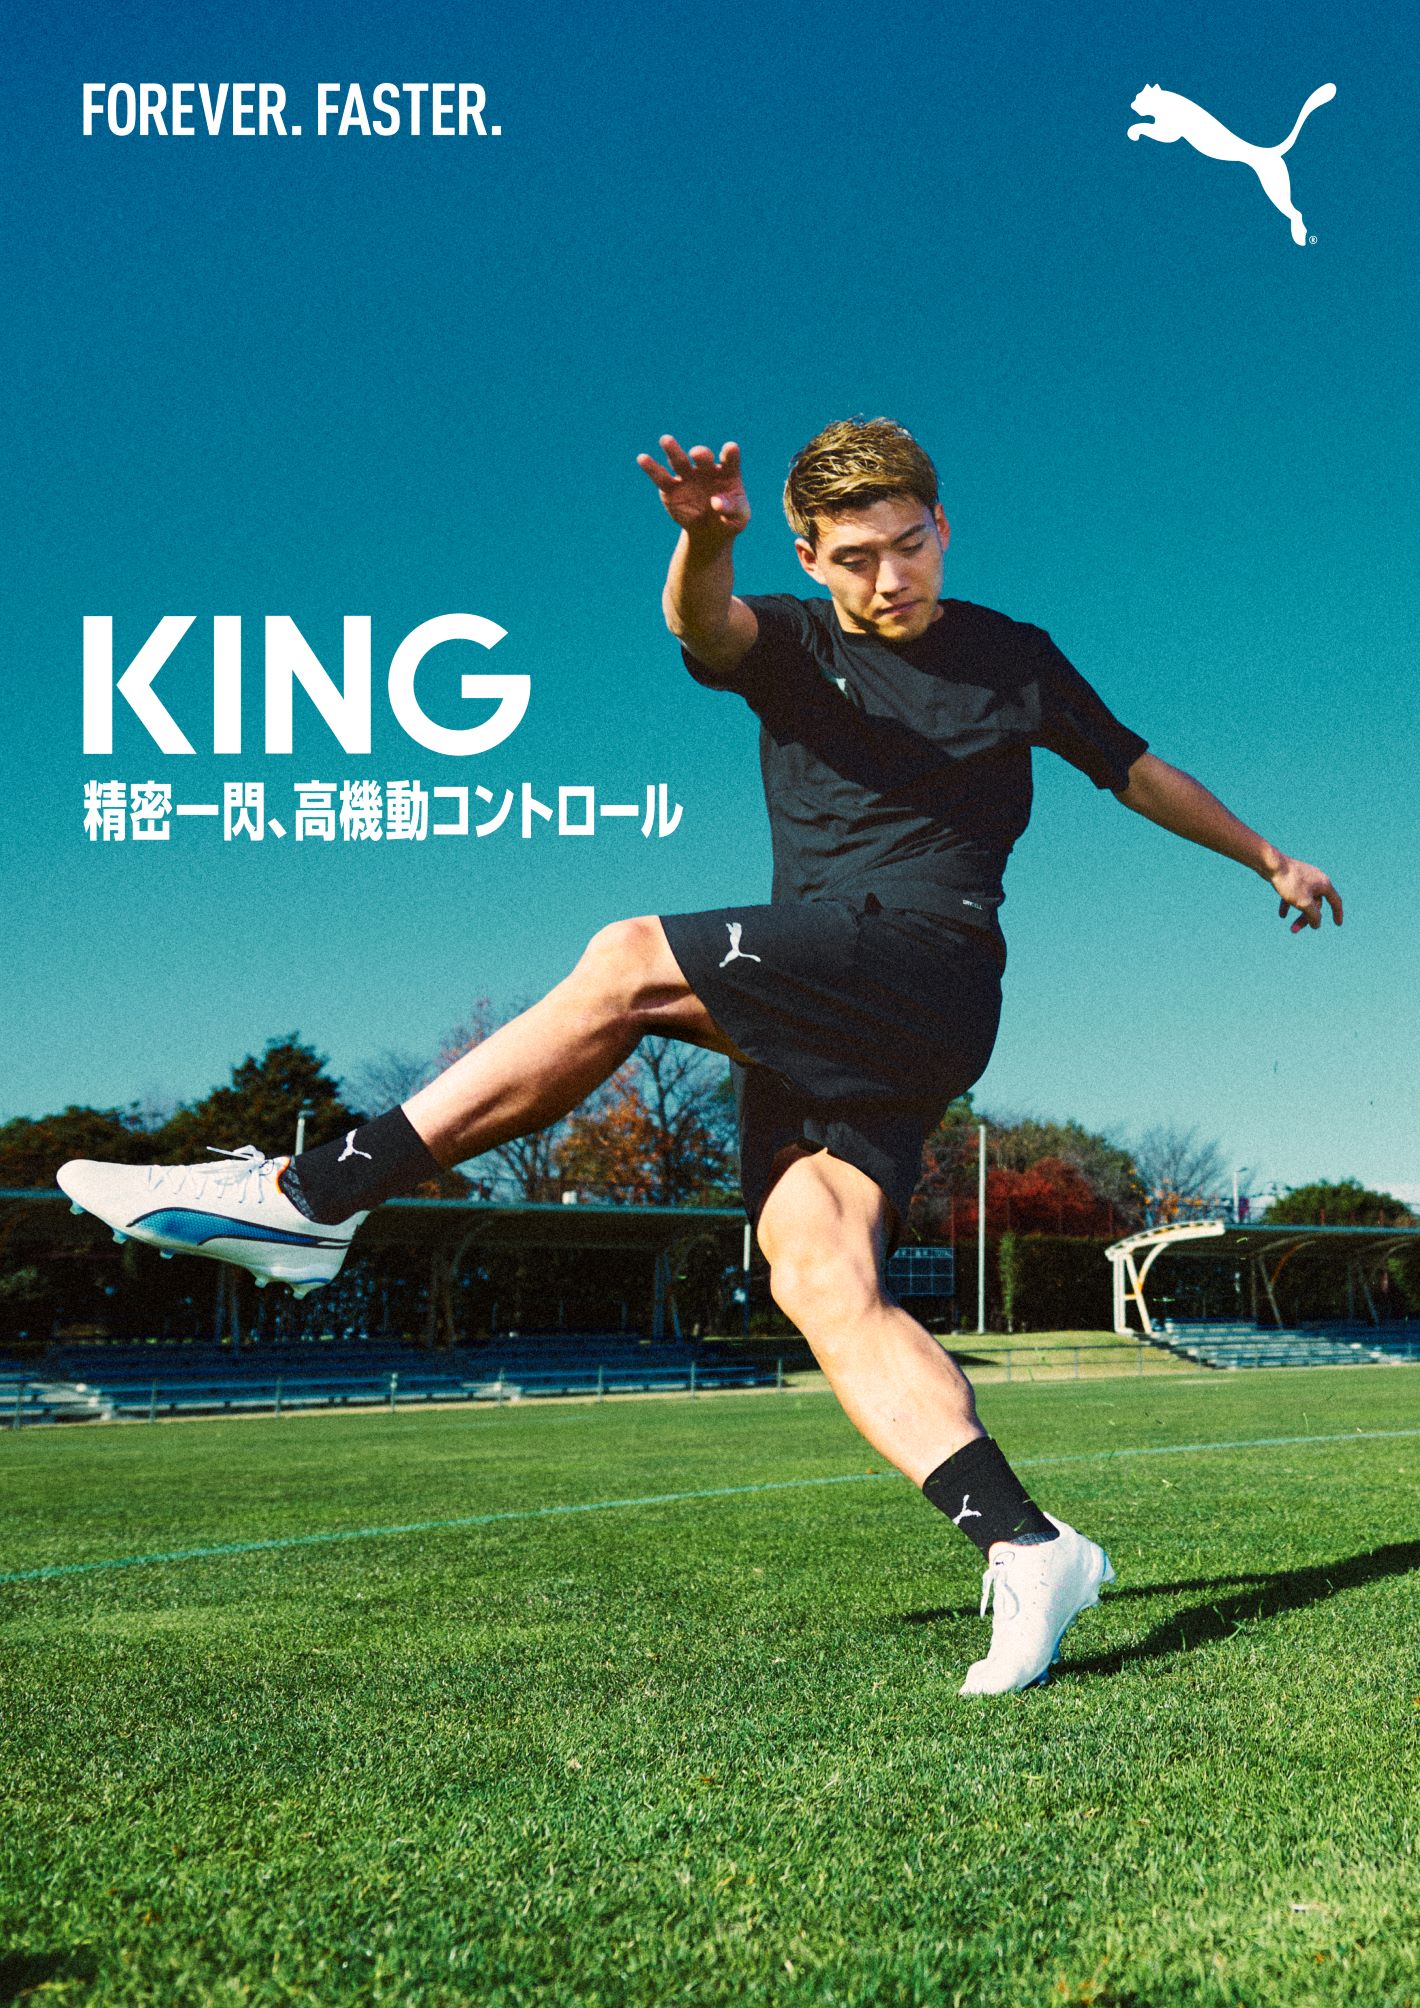 PUMA サッカースパイク　WEISWEILER-KING種類サッカーシューズスパイク